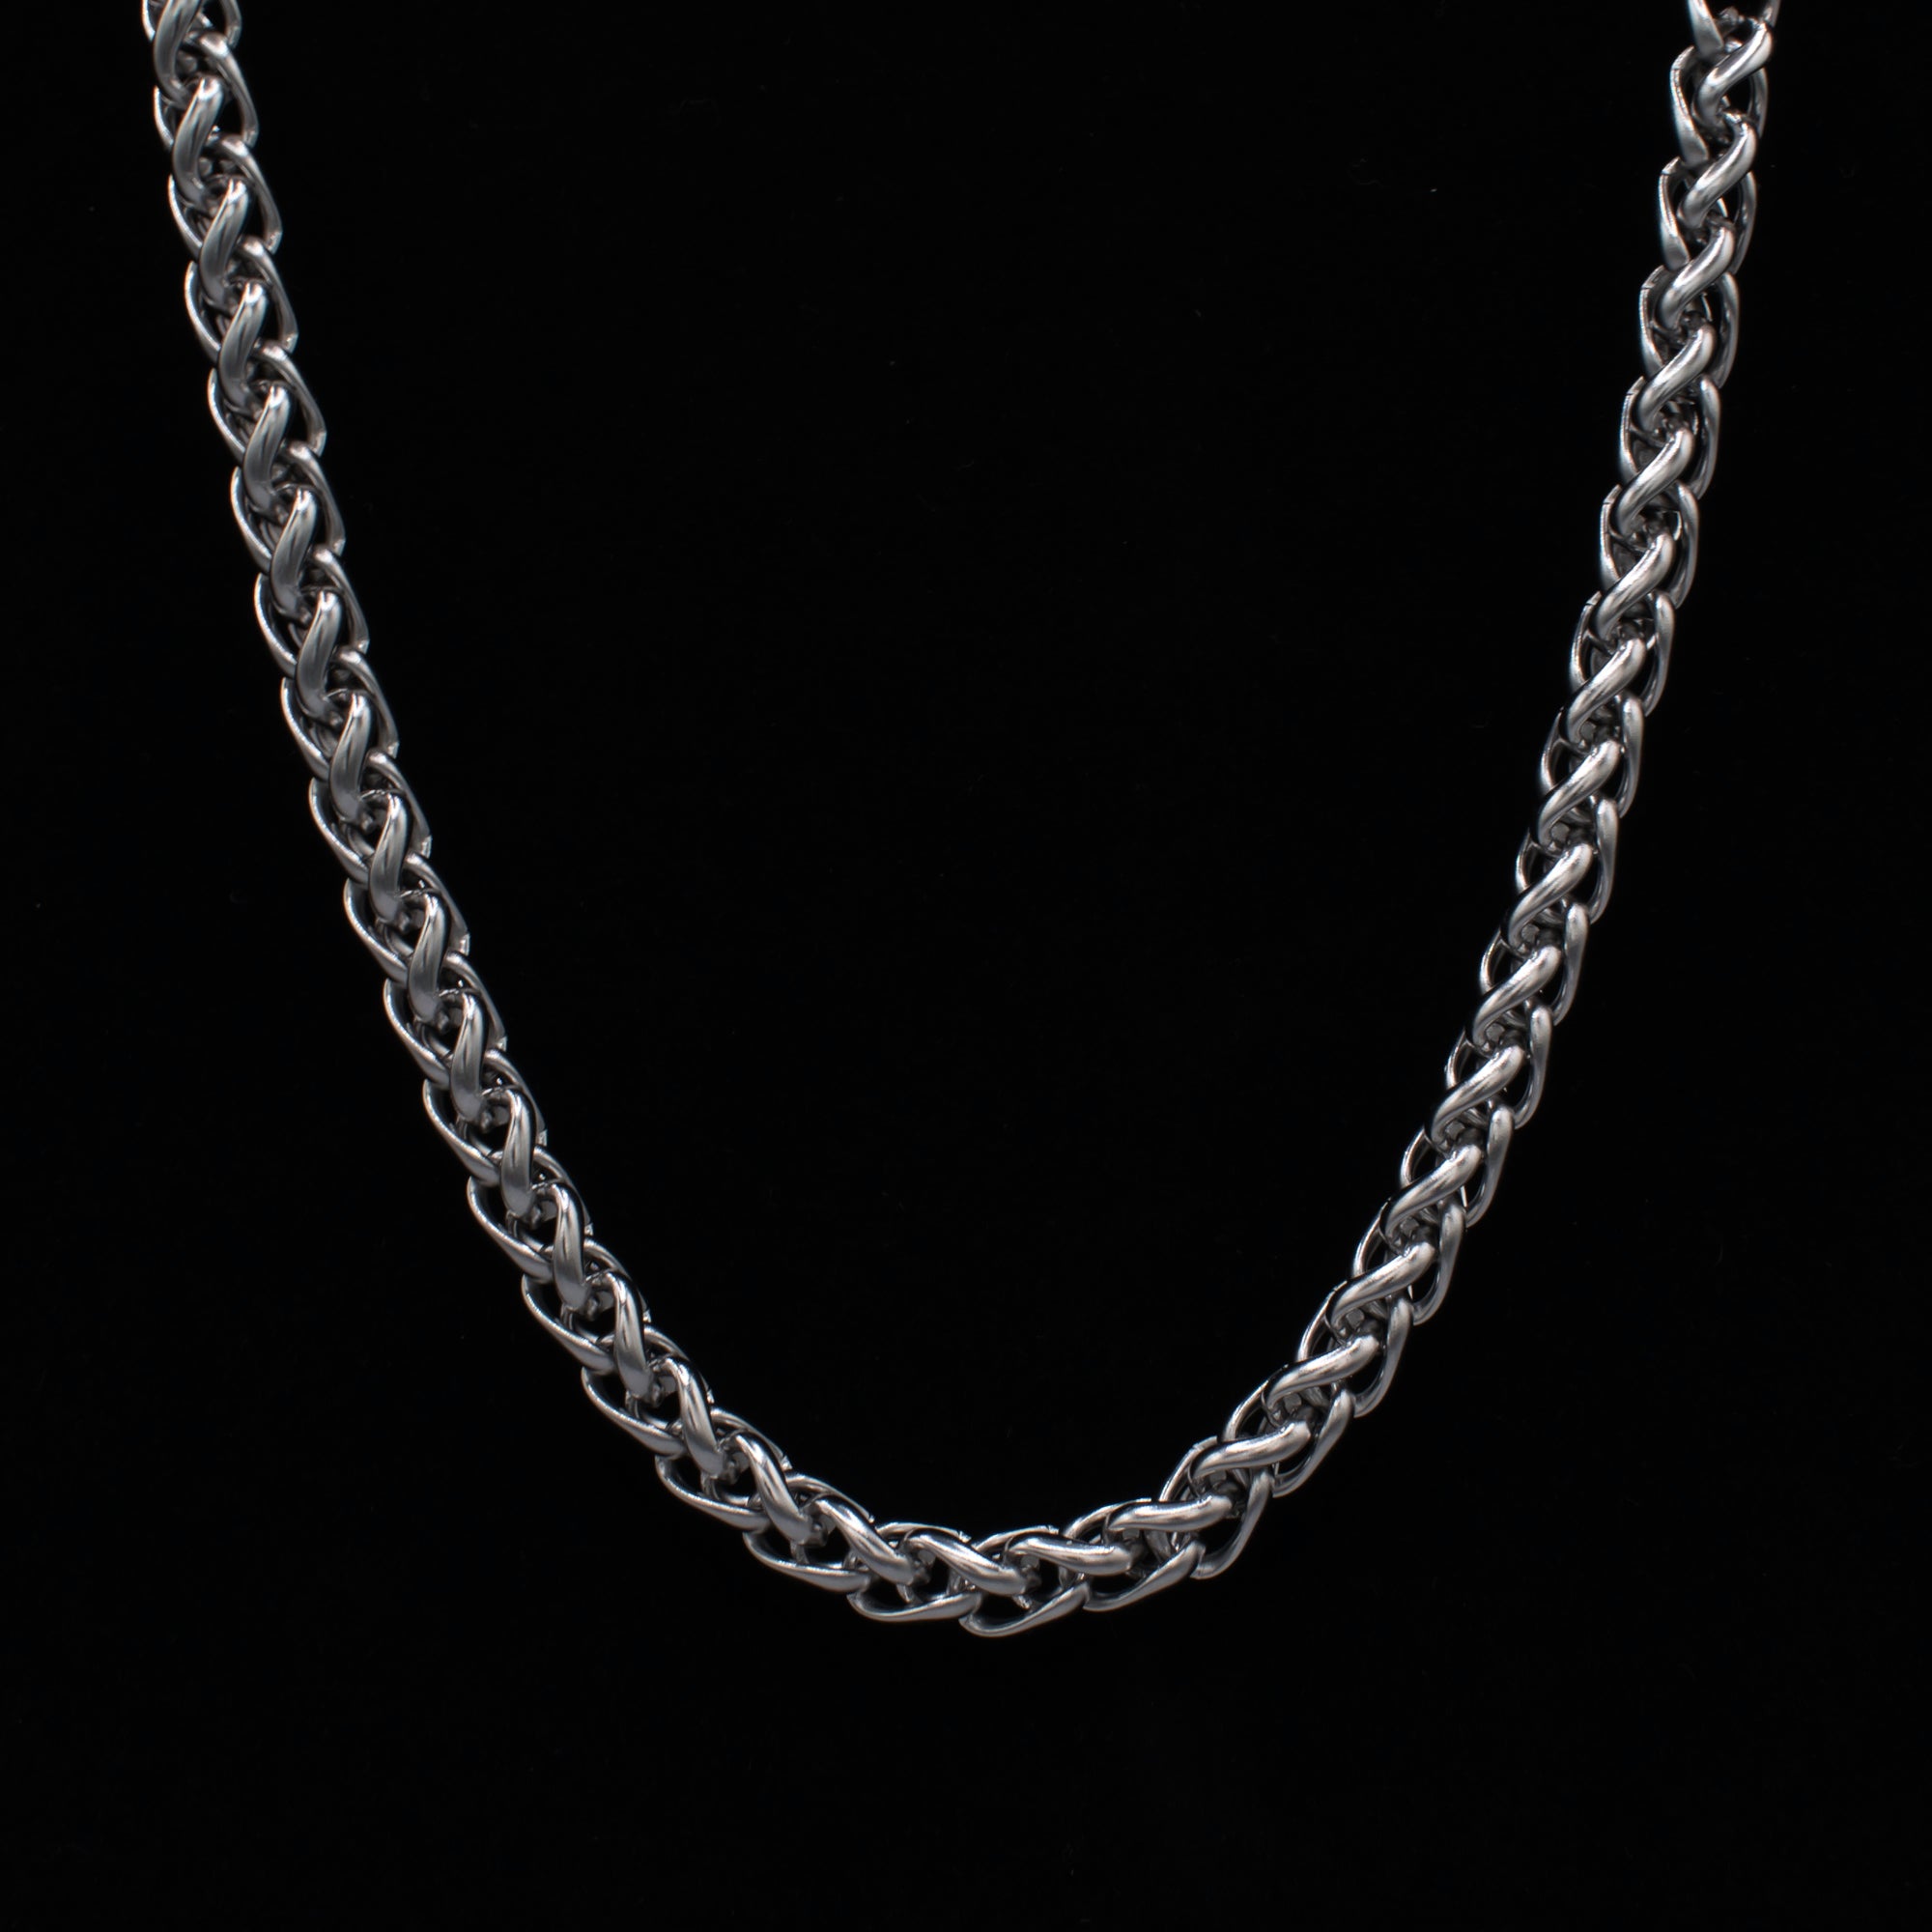 Silver Foxtail Necklace - 8mm